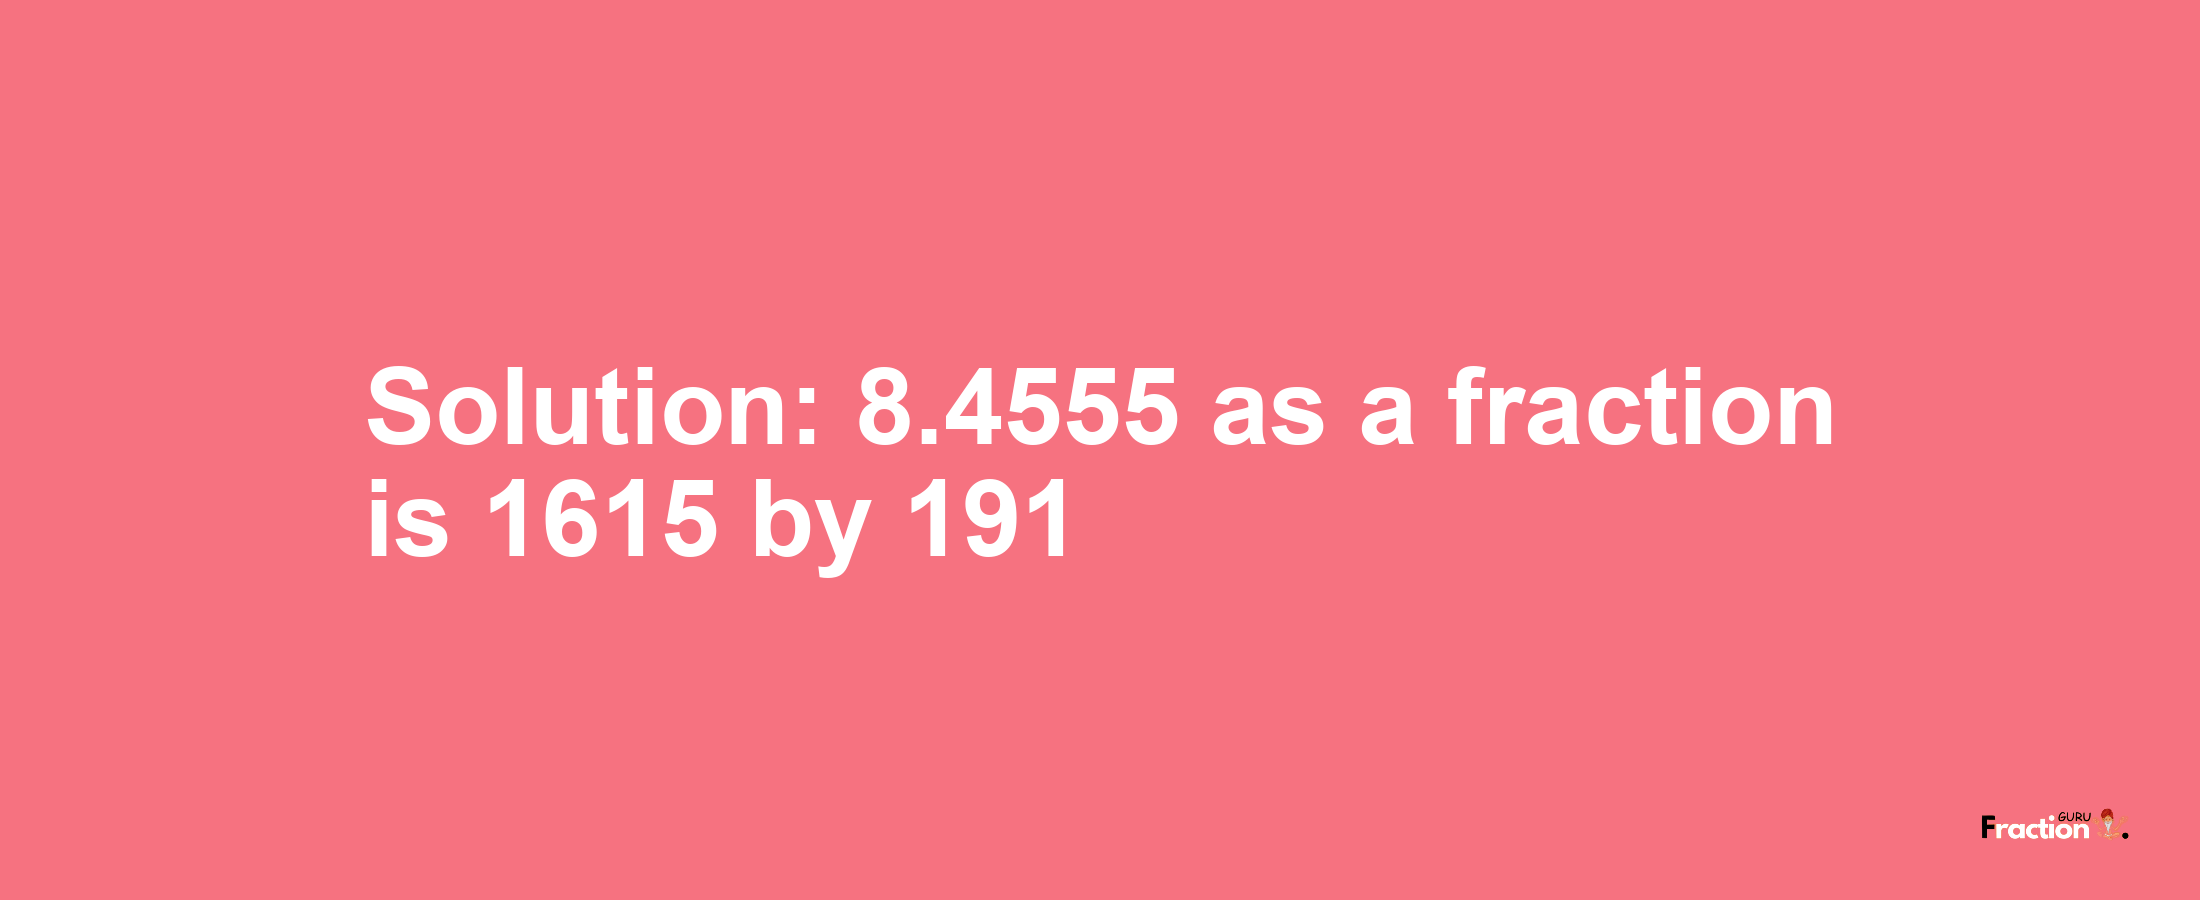 Solution:8.4555 as a fraction is 1615/191